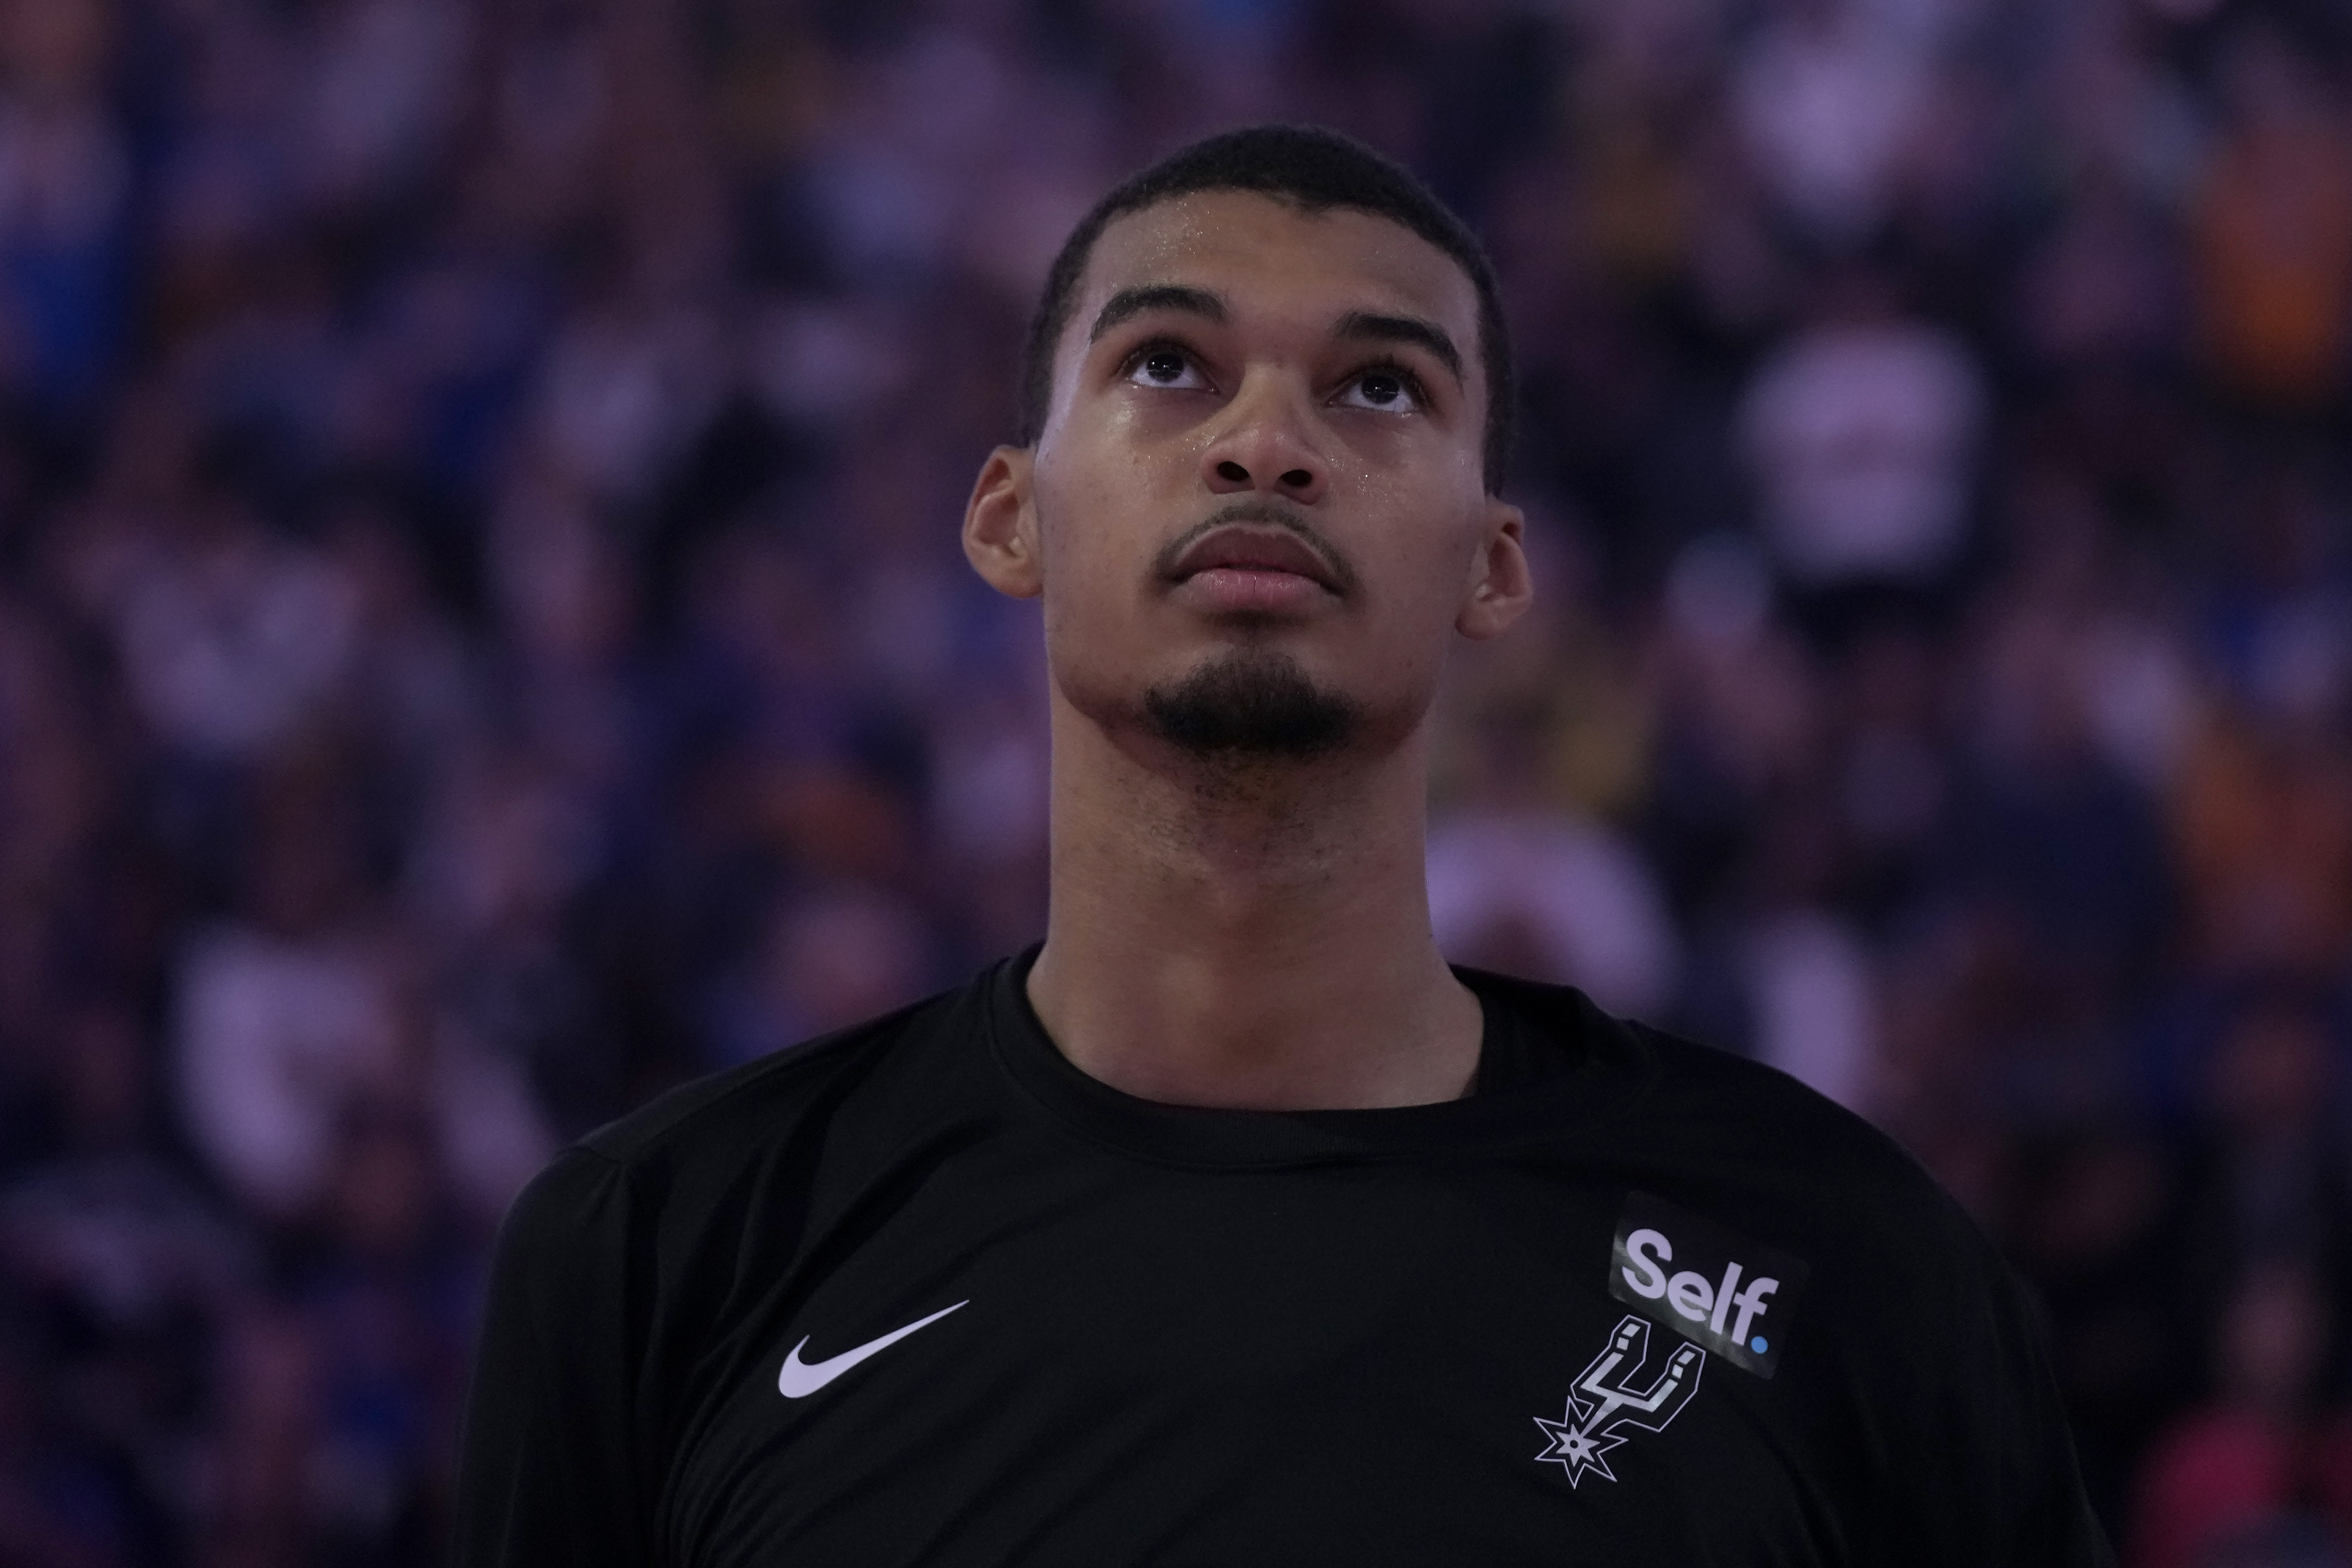 San Antonio Spurs at Phoenix Suns free NBA live stream: How to watch start  time, channel, betting odds 